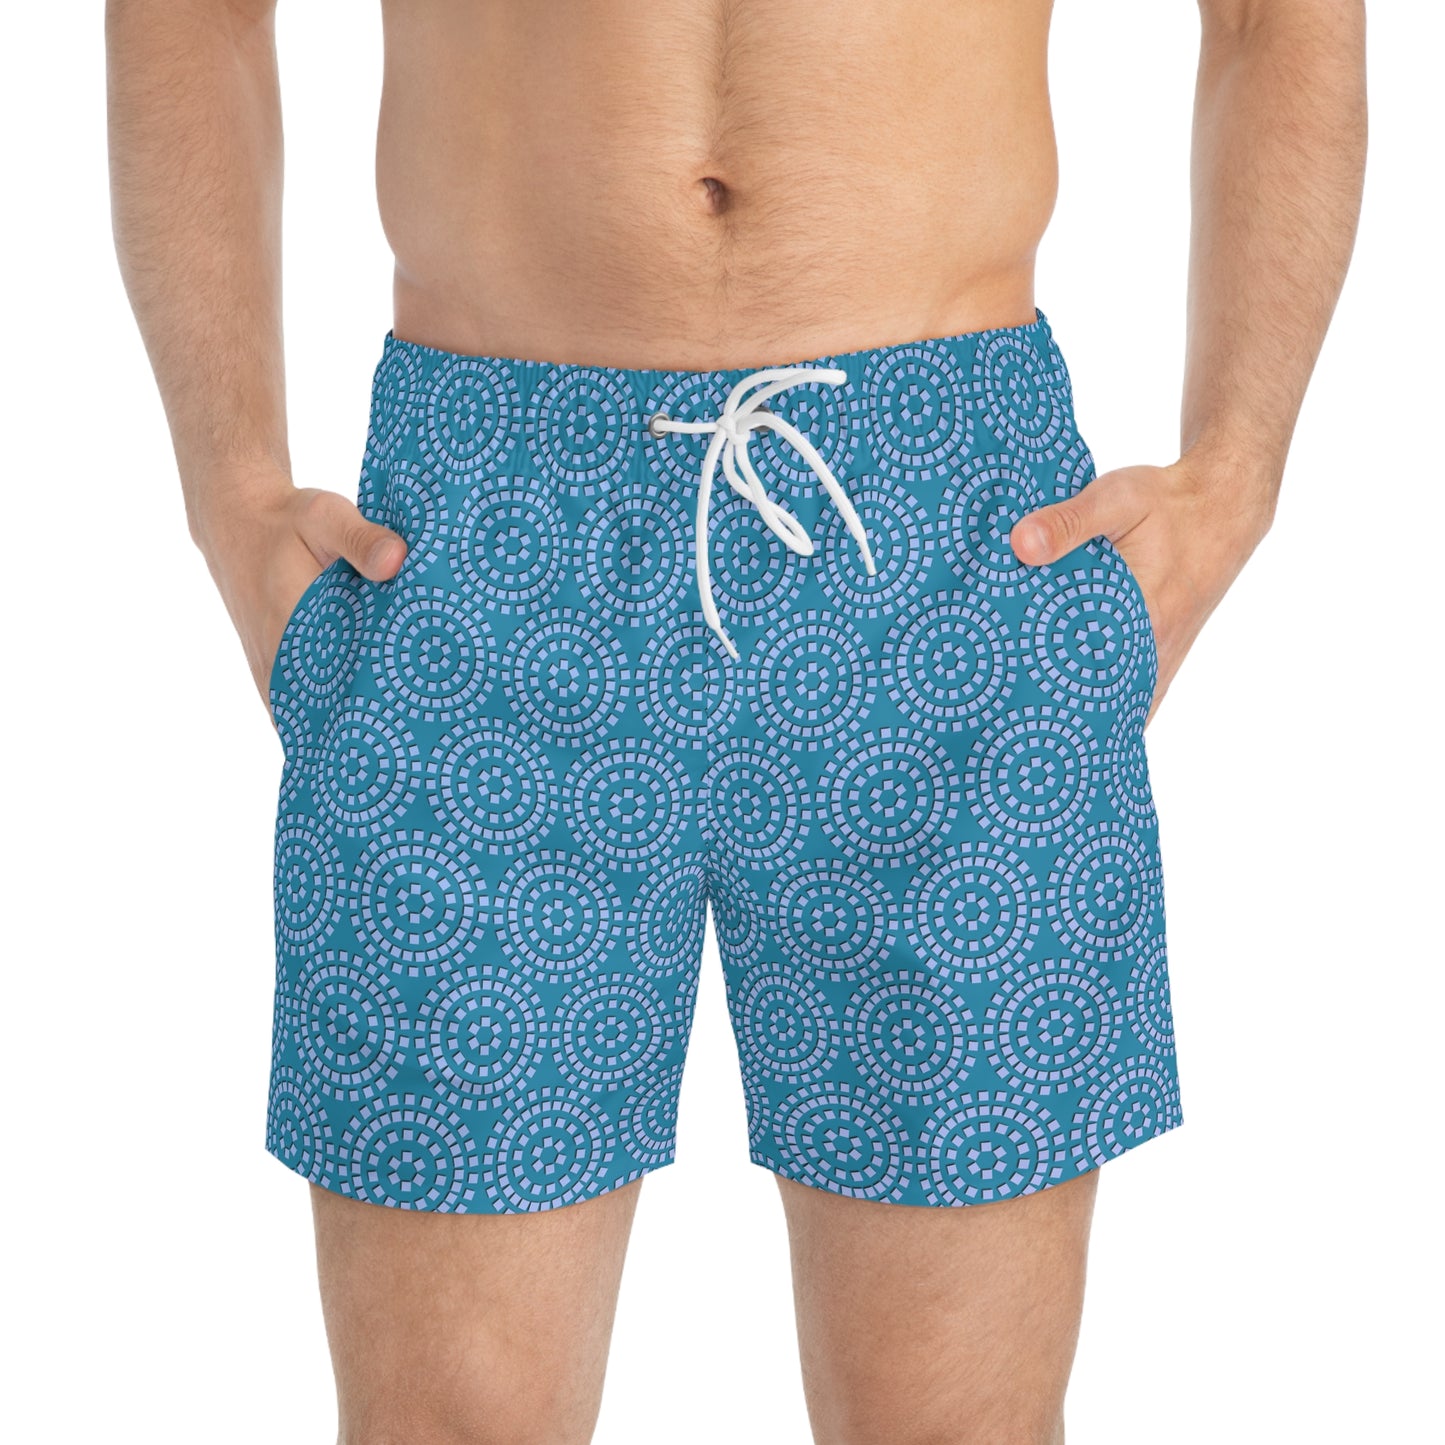 Circles and More Circles - Turquoise - Swim Trunks